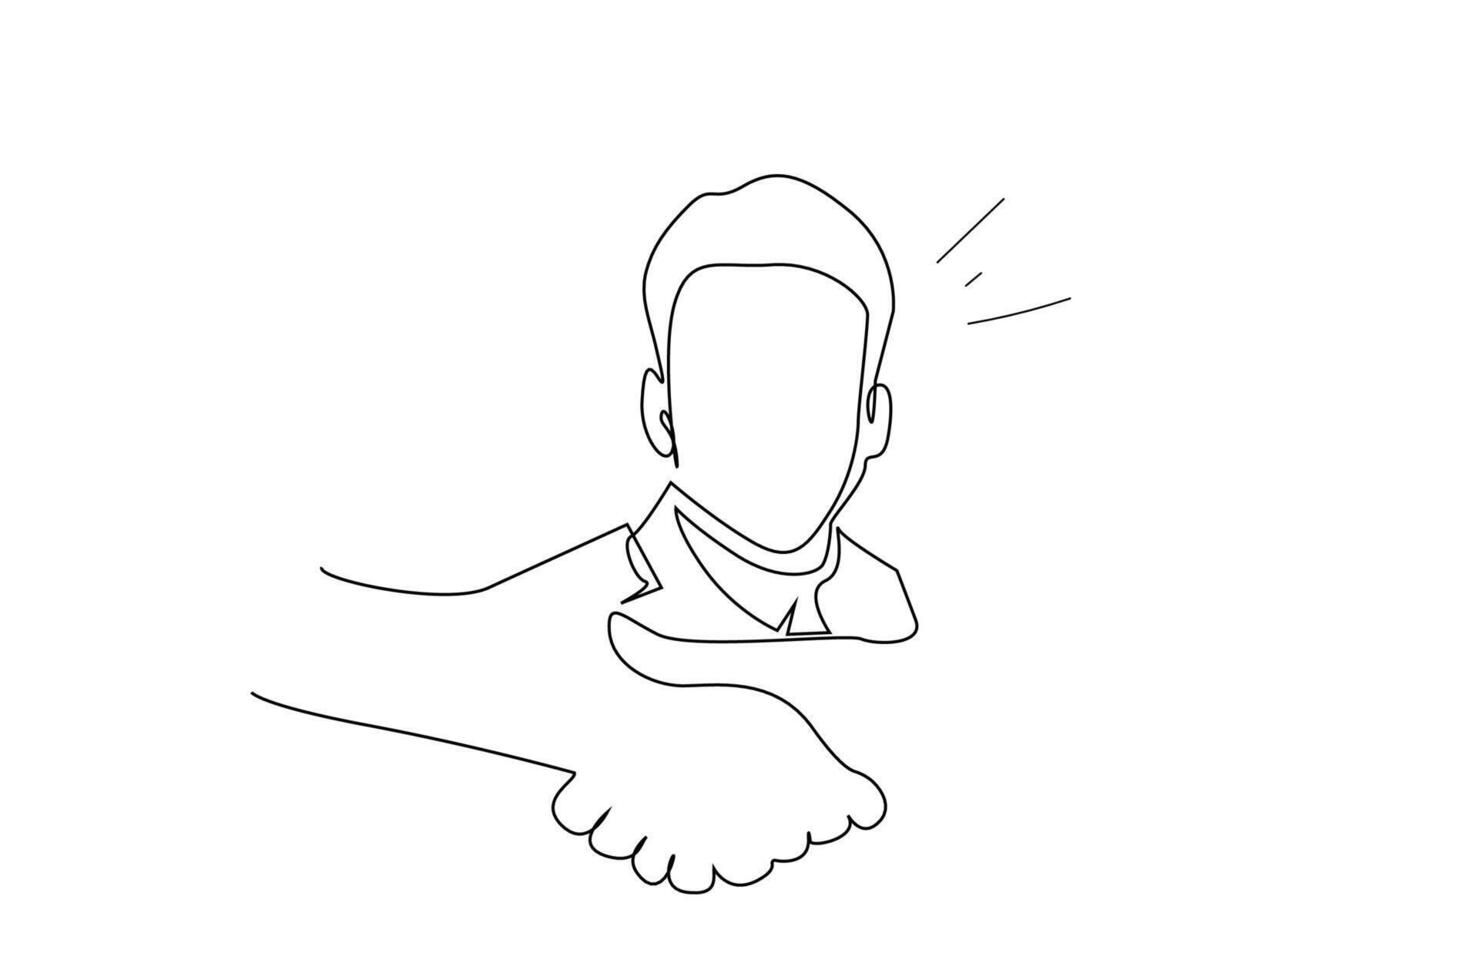 people agreement shaking hands stressed boss manager employee one line art design vector